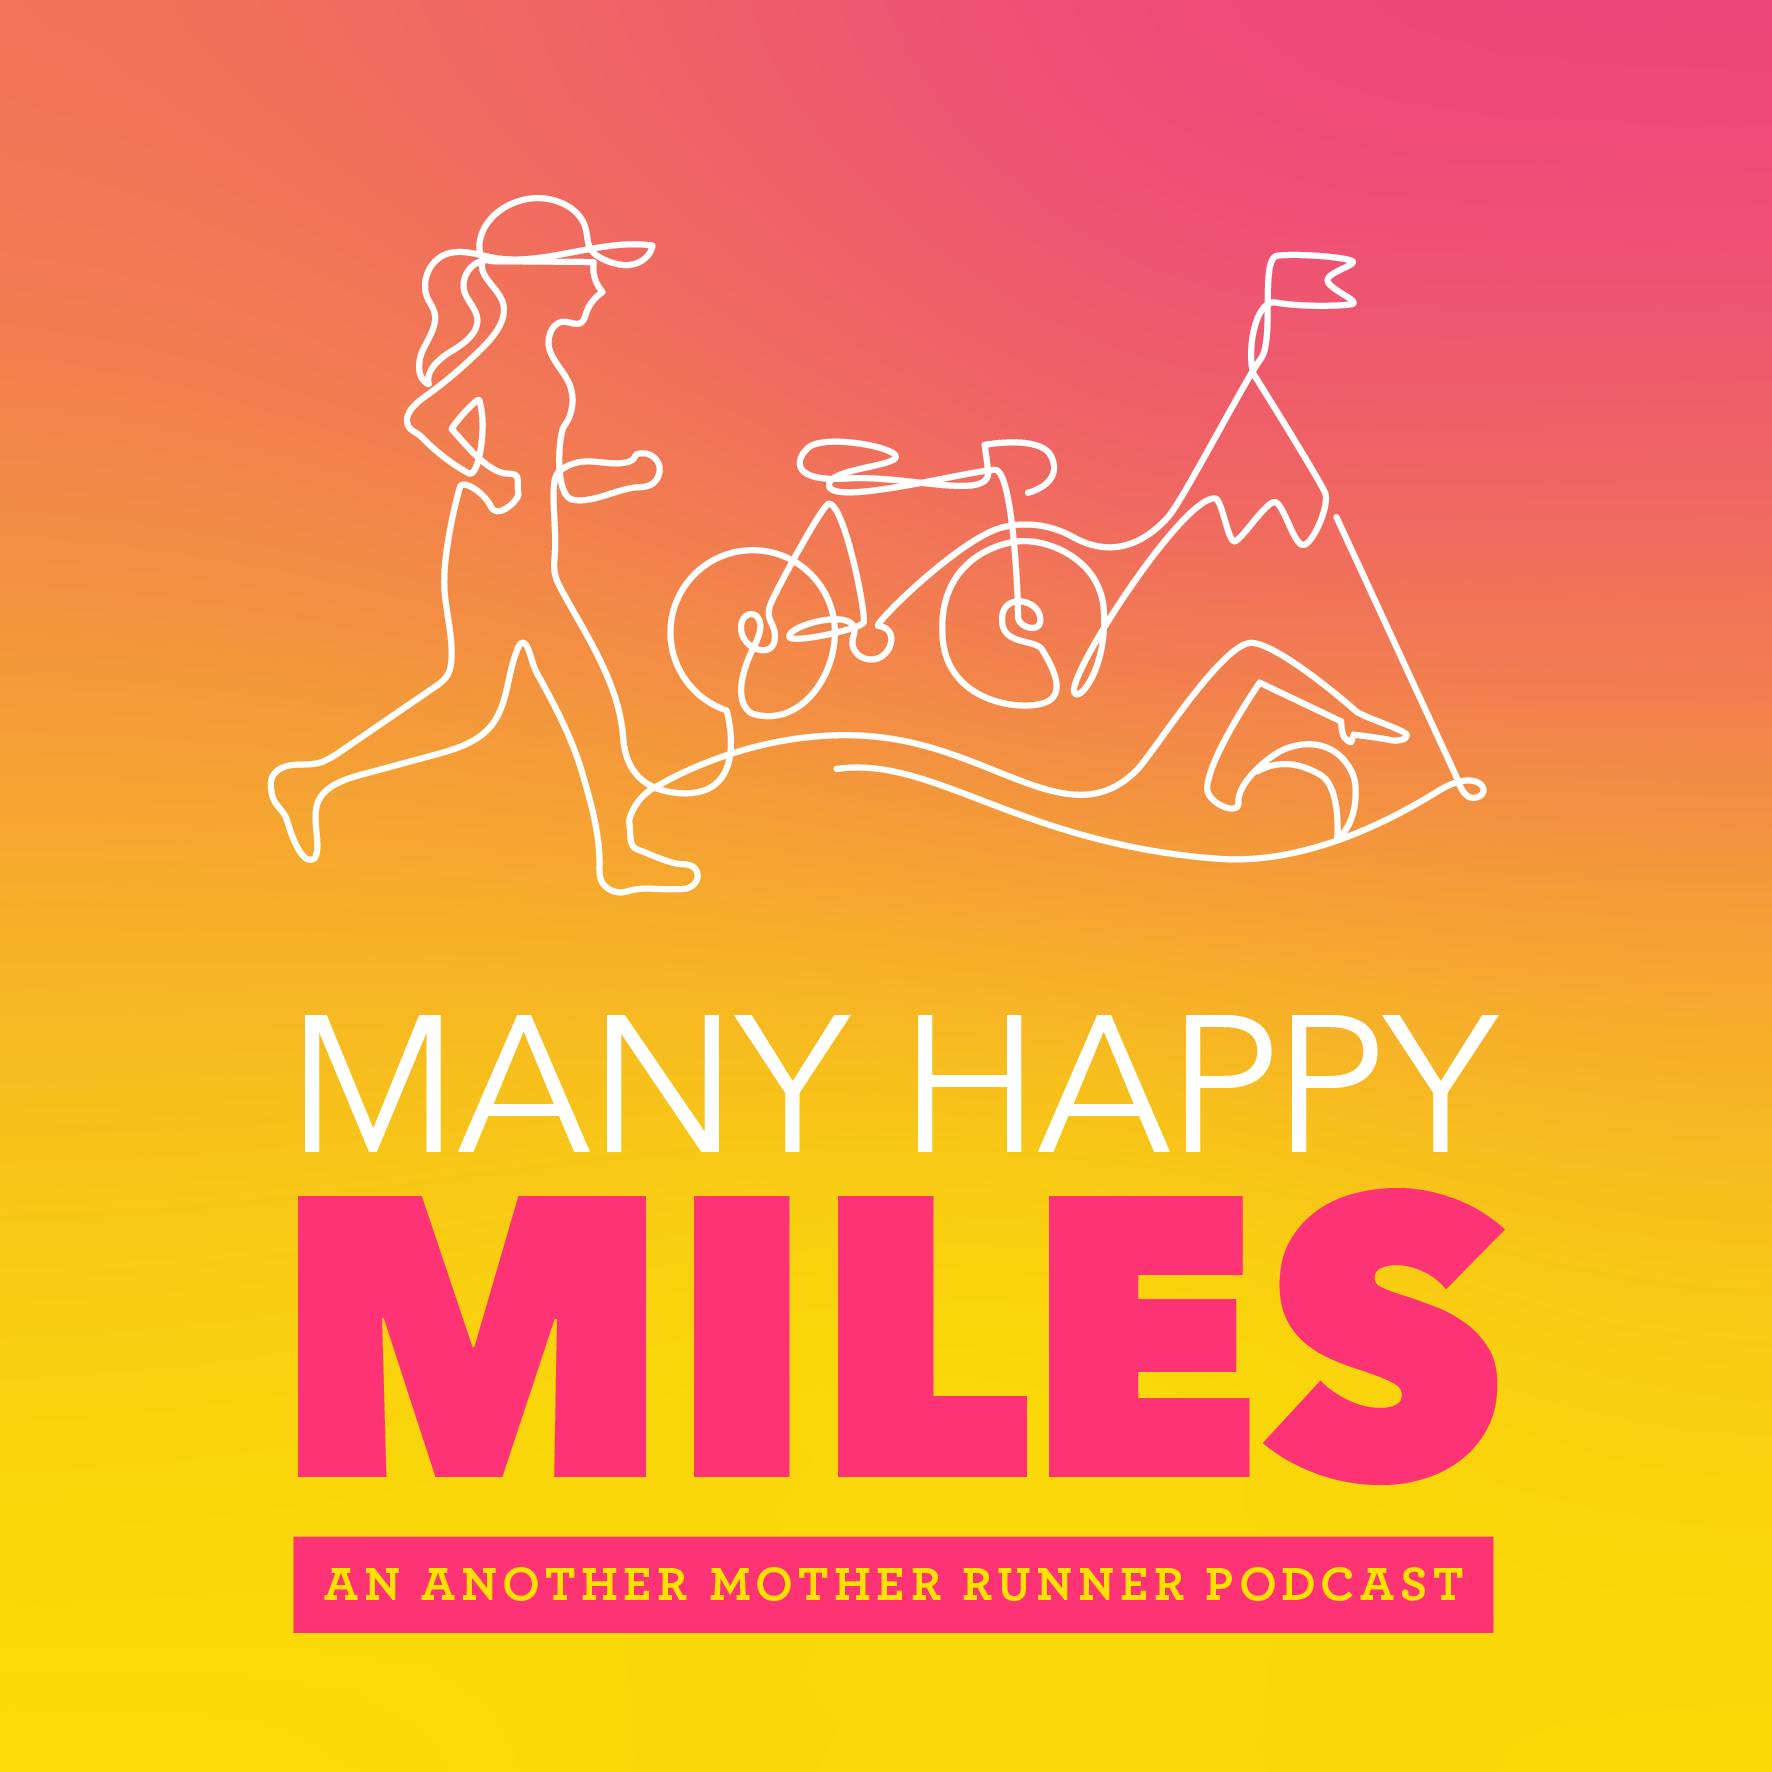 Many Happy Miles: Fitness Myths Busted